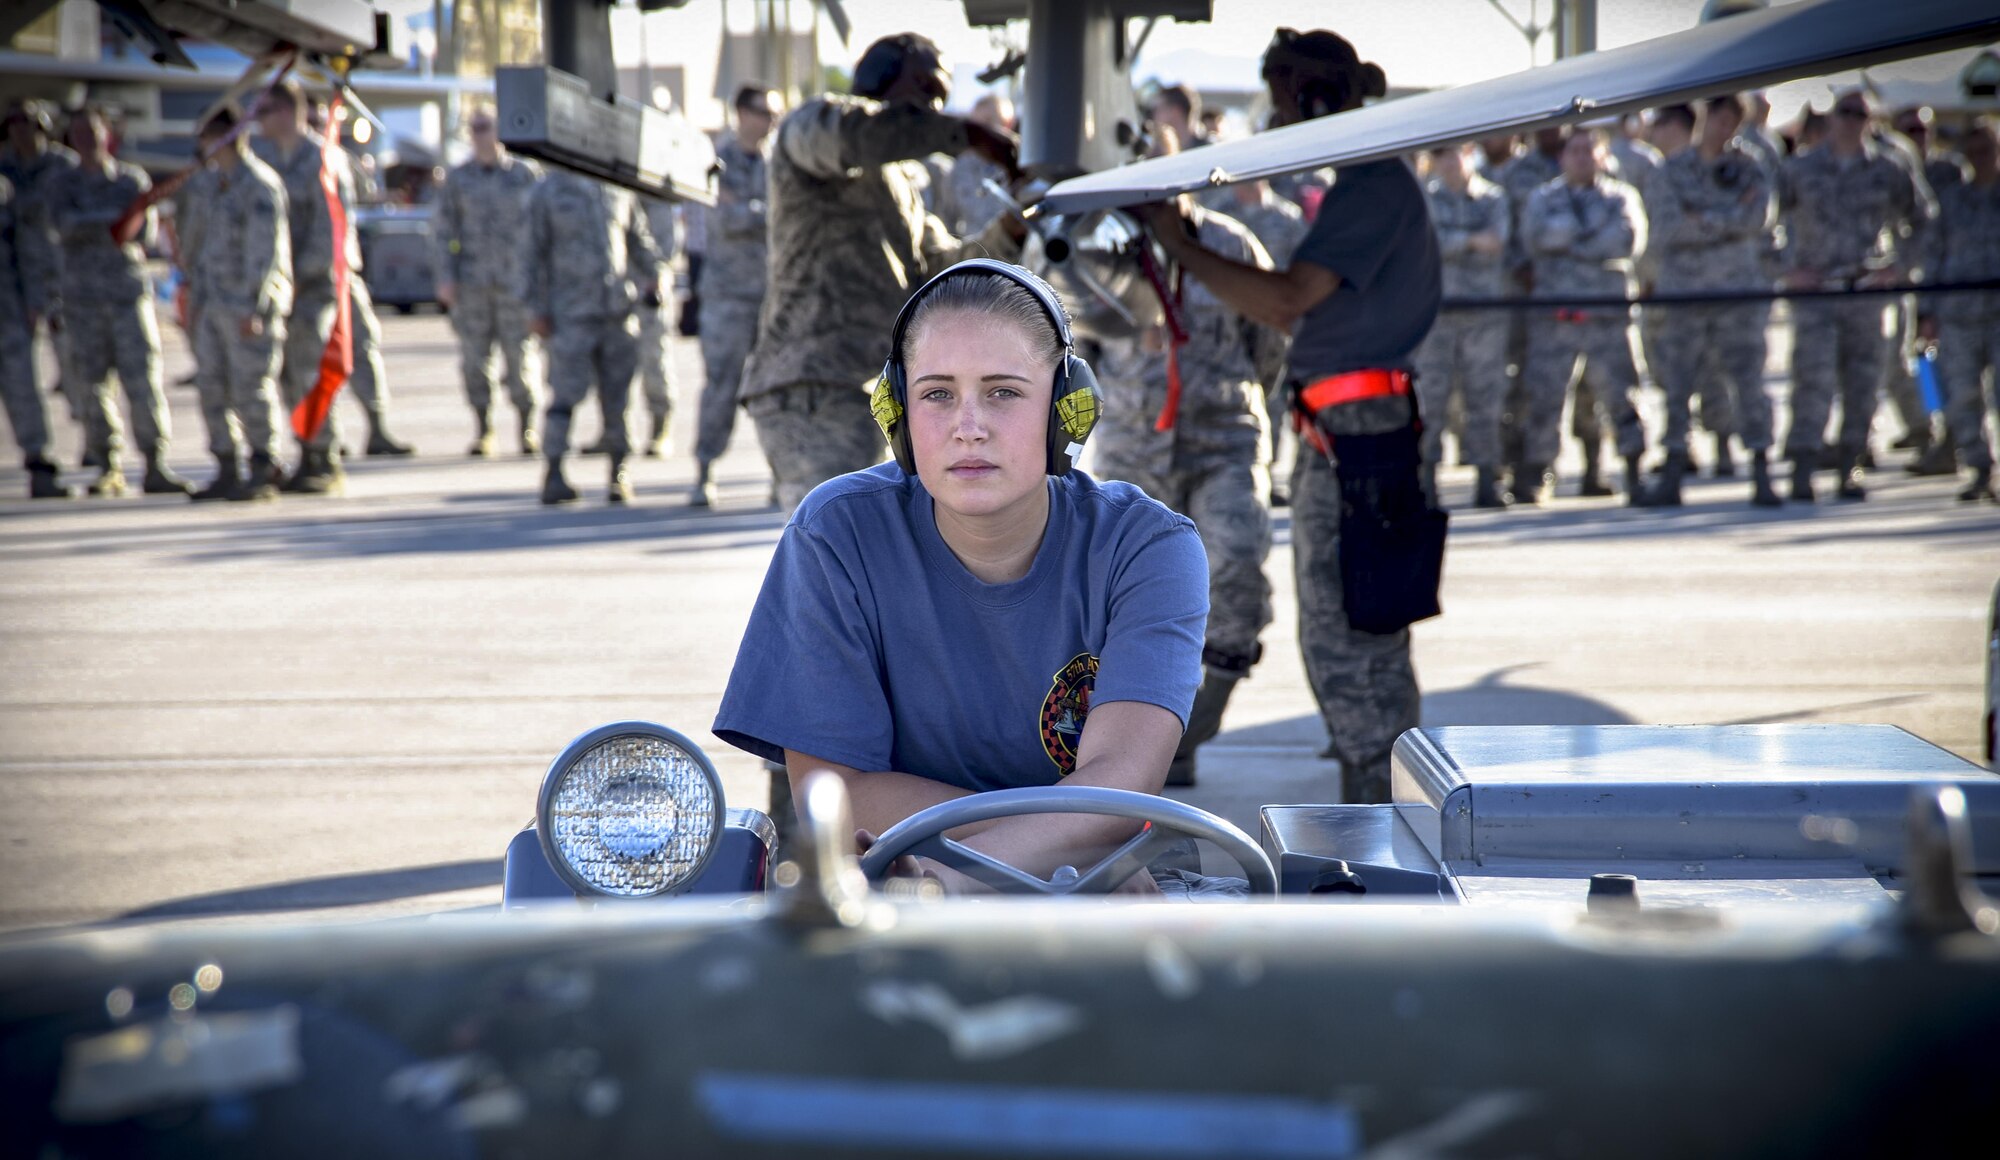 An Airman from the 57th Maintenance Group prepares to load a bomb on an F-16 Fighting Falcon, assigned to the 16th Weapons Squadron, during a load crew competition June 30, 2017, at Nellis Air Force Base, Nev. Each team member played a specific role during the competition. (U.S. Air Force photo by Airman 1st Class Andrew D. Sarver/Released)